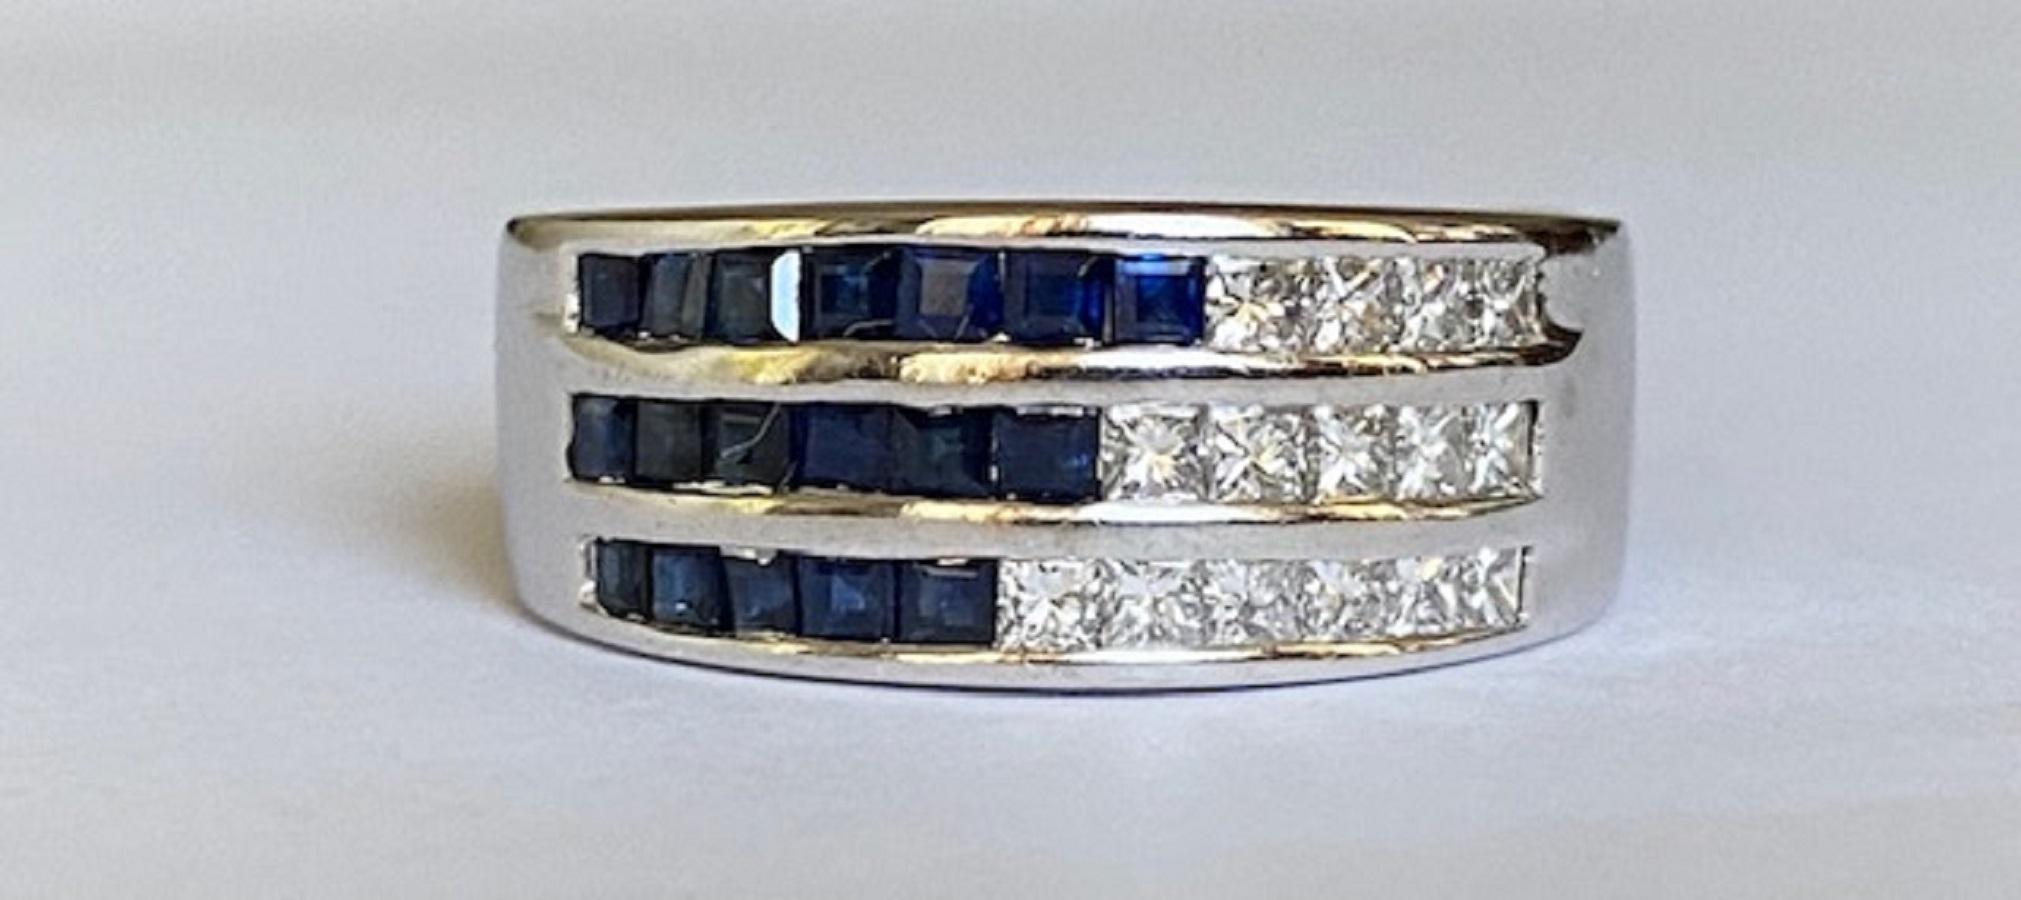 Offered in good condition, 18-karat white gold band ring, decorated with 15 princess cut diamonds of approx. 0.30 ct in total, G/VS and 18 'carré' (square) cut sapphires of approx. 0.40 ct in total.
Gold grade: 18 kt (marked)
15 princess cut